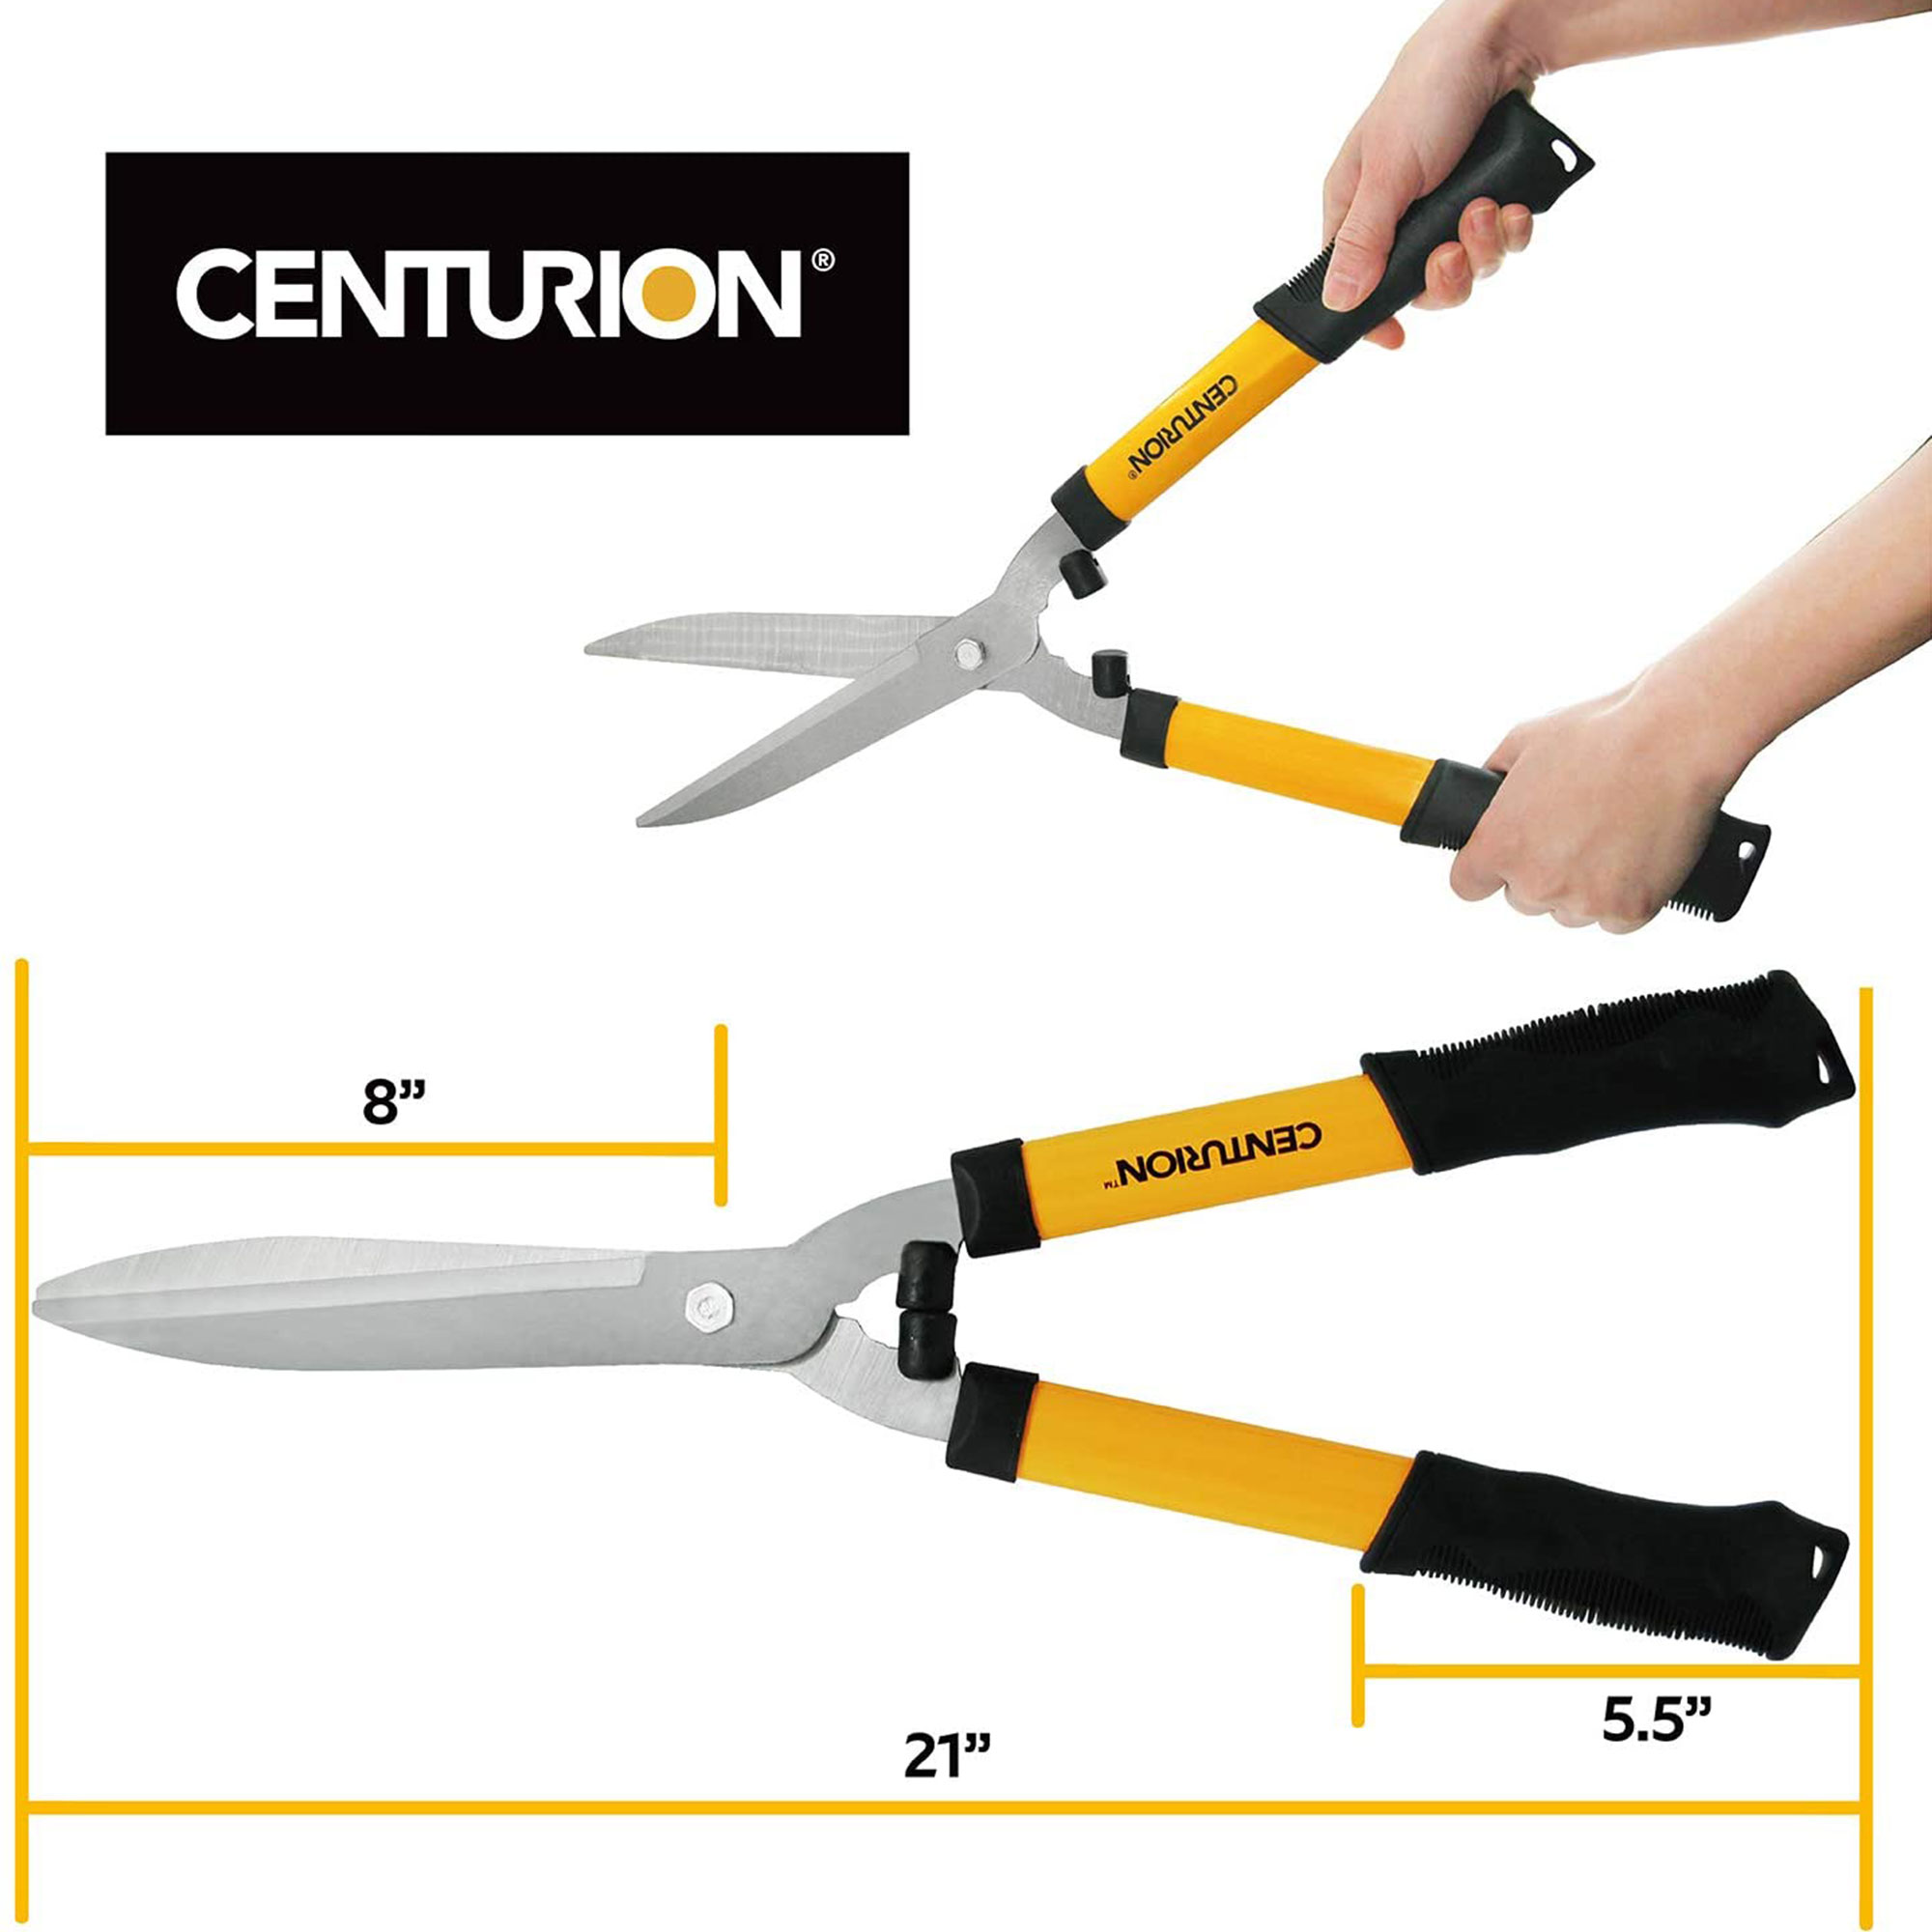 CENTURION 511 8 Inch Precision Steel Blades Hedge Shears w/ Non-Slip Grips - image 4 of 8